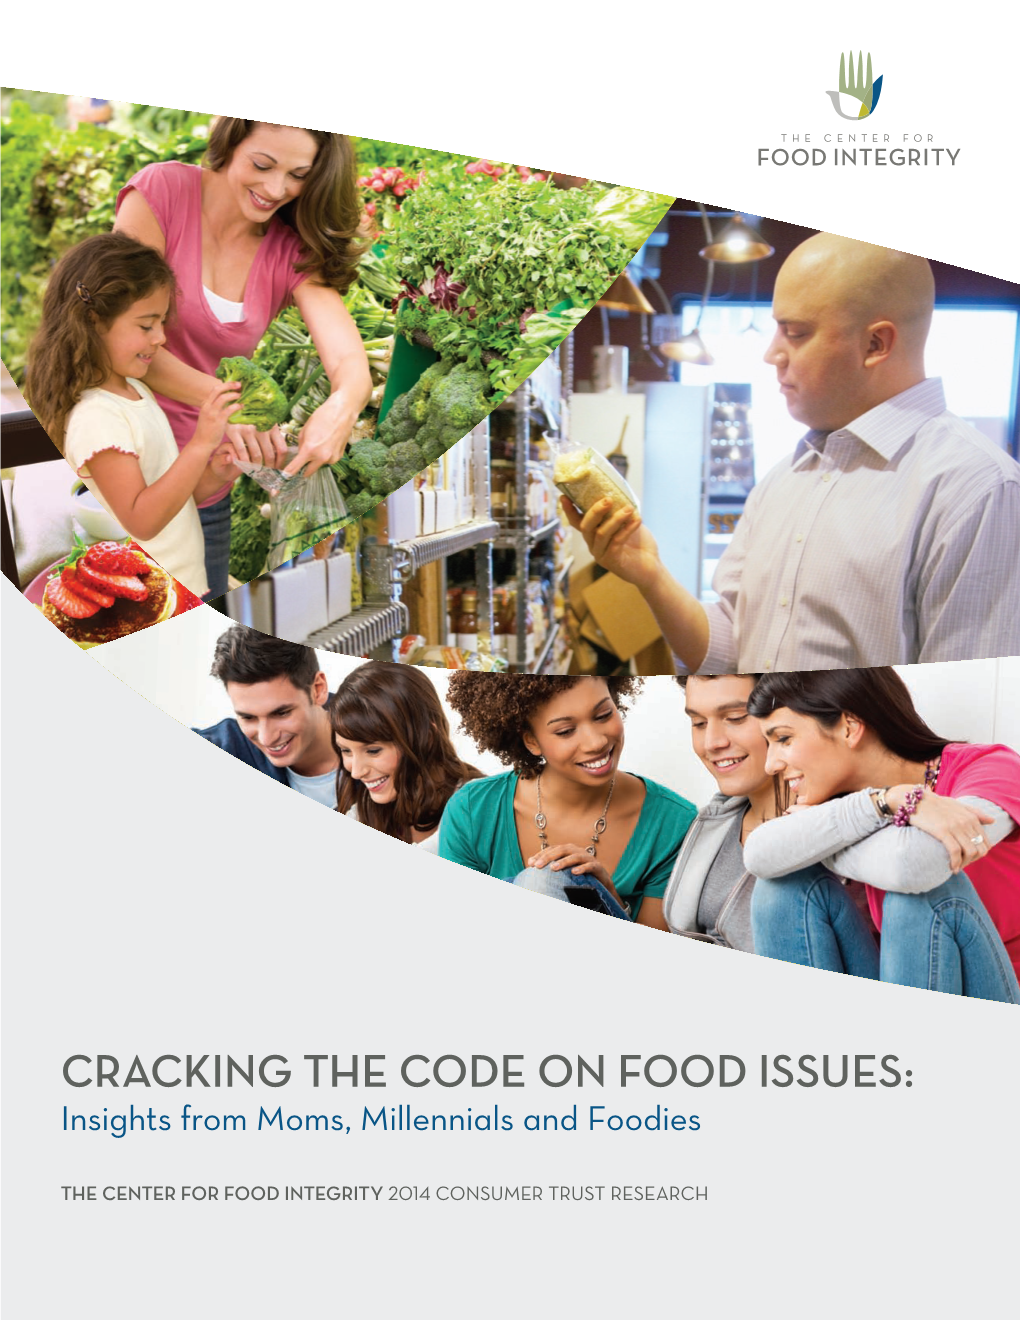 CRACKING the CODE on FOOD ISSUES: Insights from Moms, Millennials and Foodies